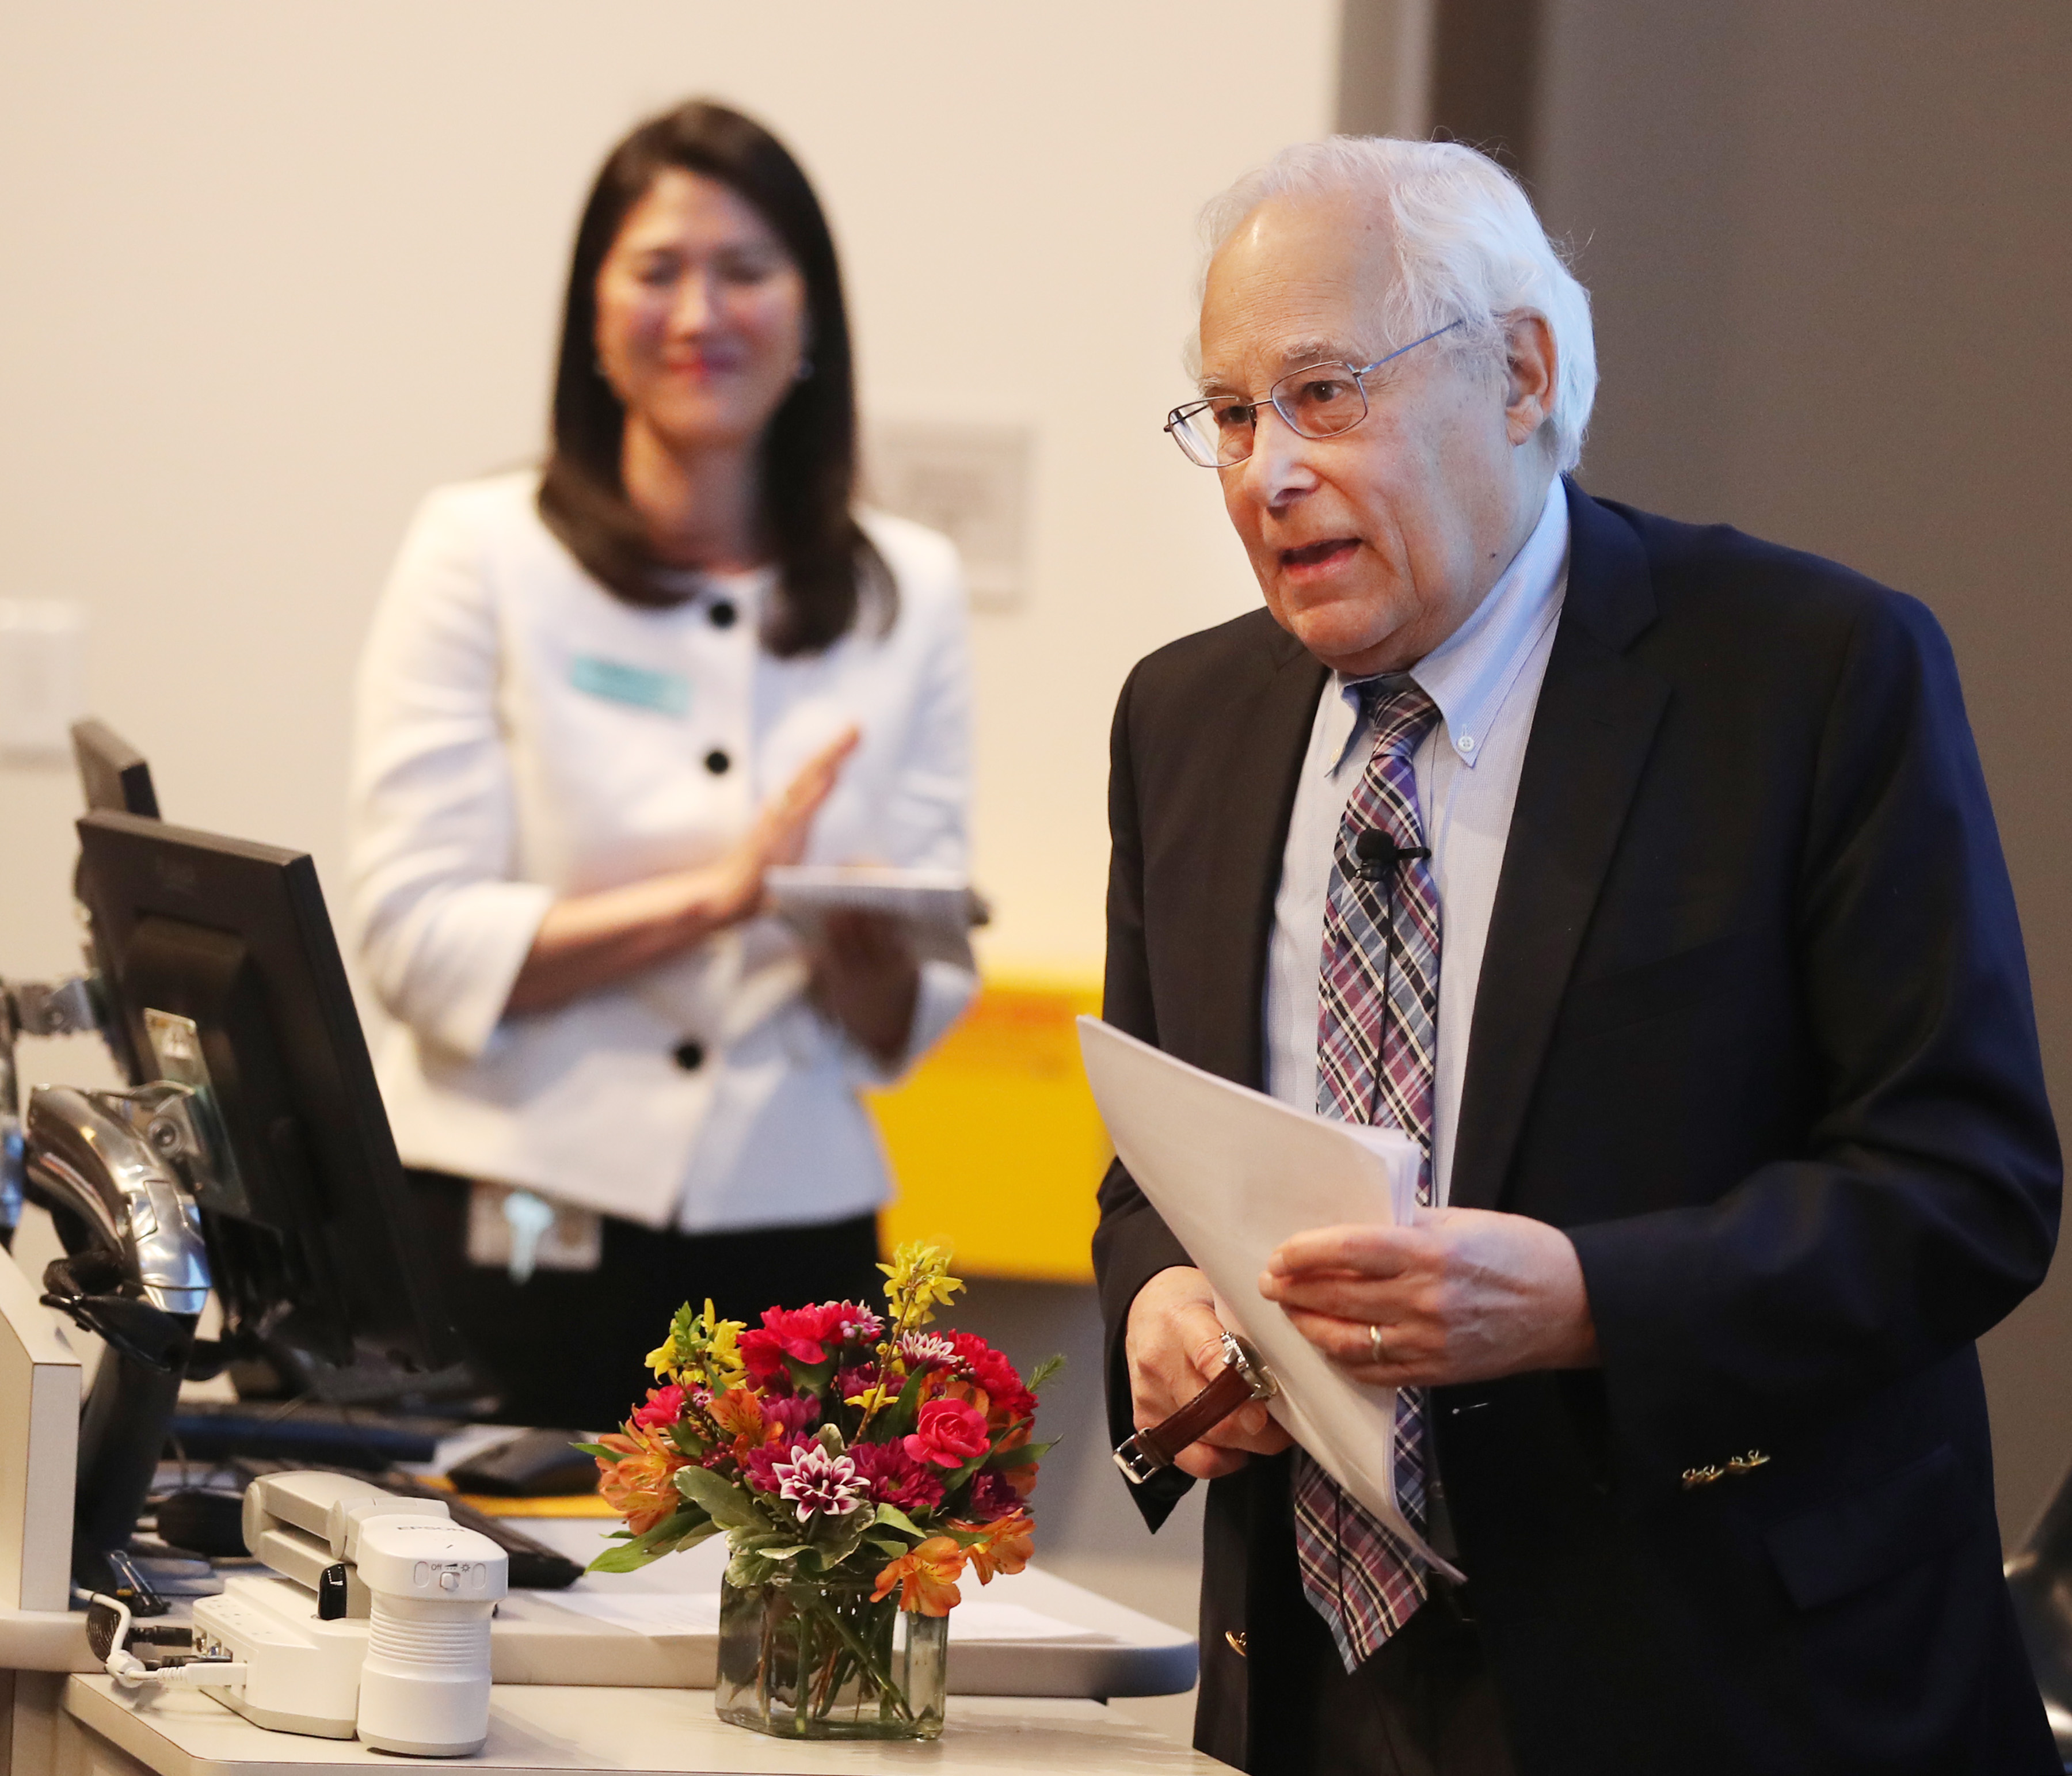 Don Berwick, M.D., M.P.P., renowned leader in health care quality and cost control, delivers Parrott Lecture.